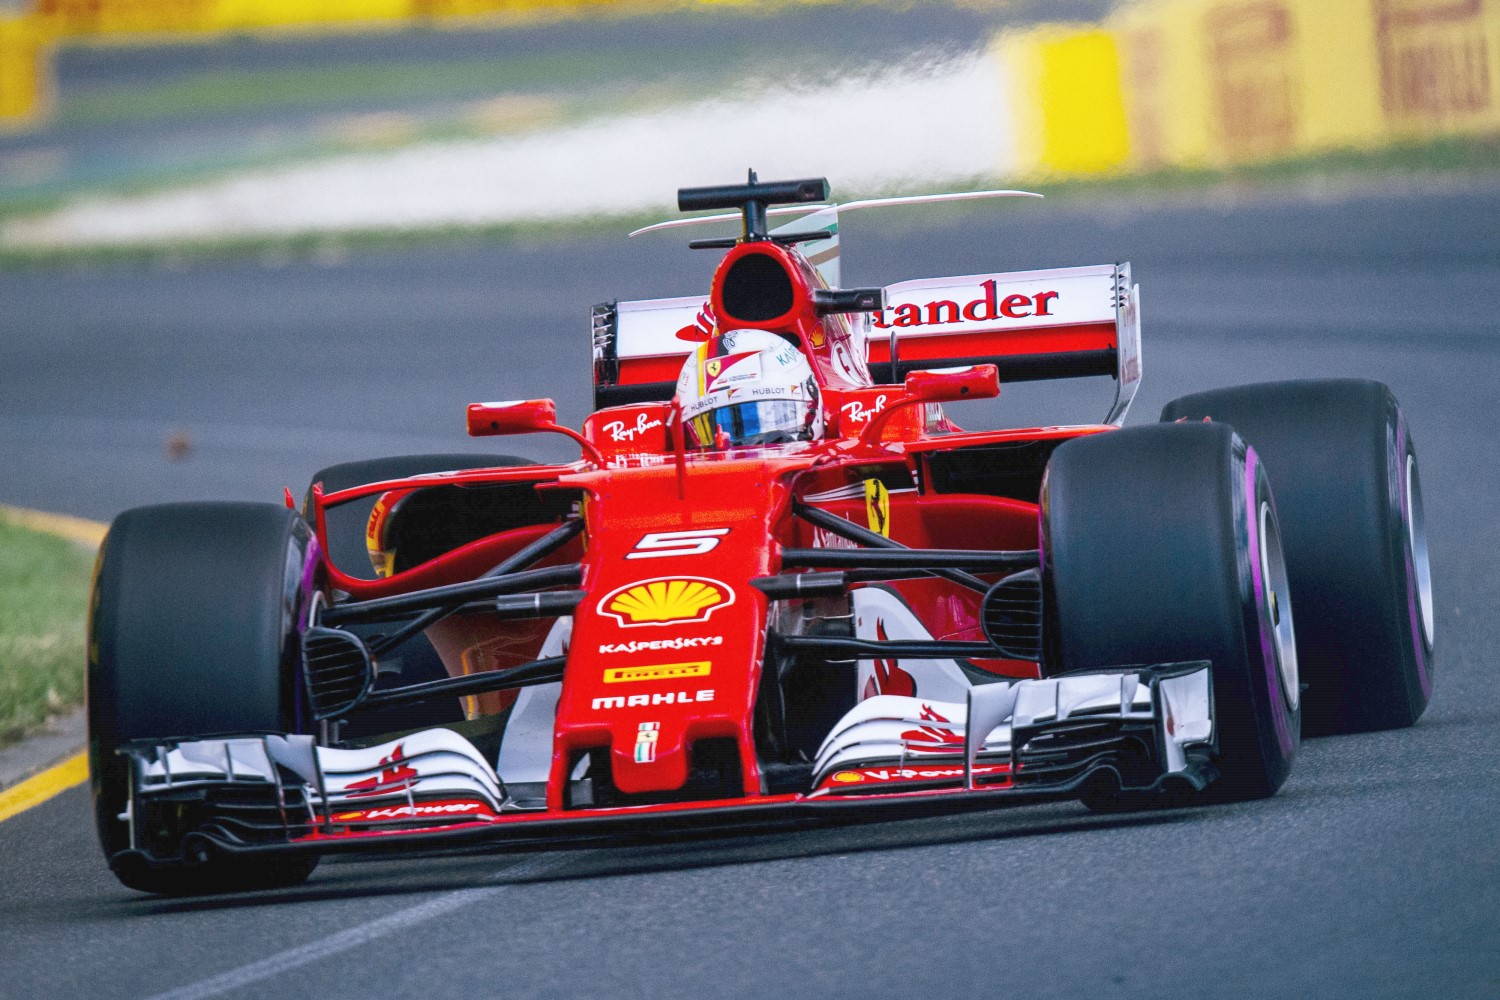 Can Vettel go 2-for-2 in China?